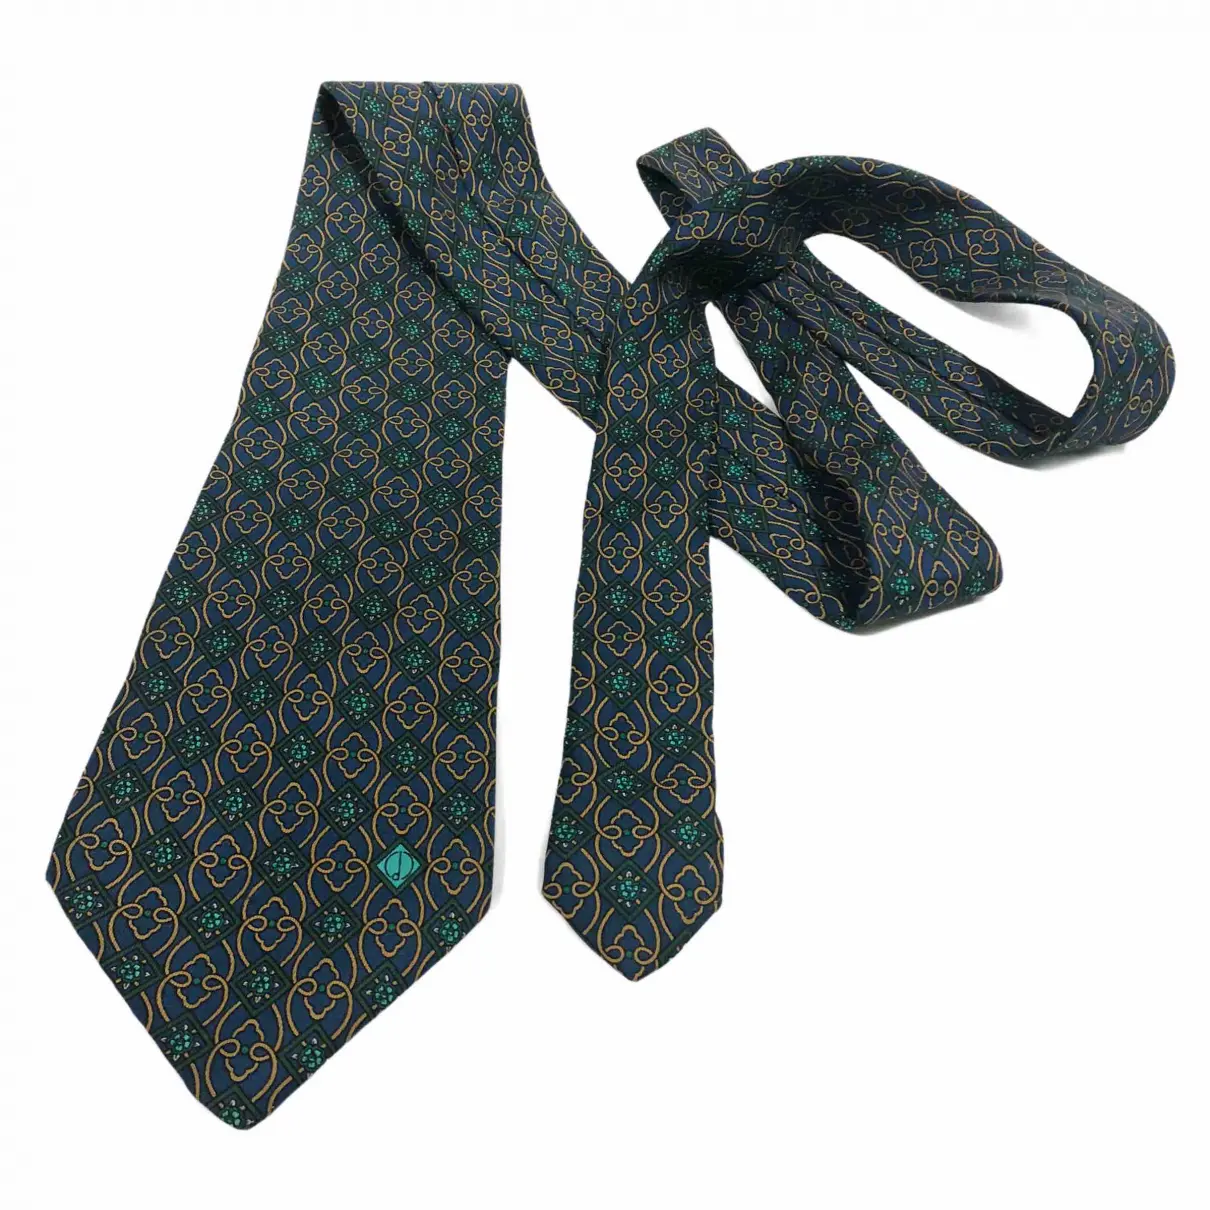 Luxury Alfred Dunhill Ties Men